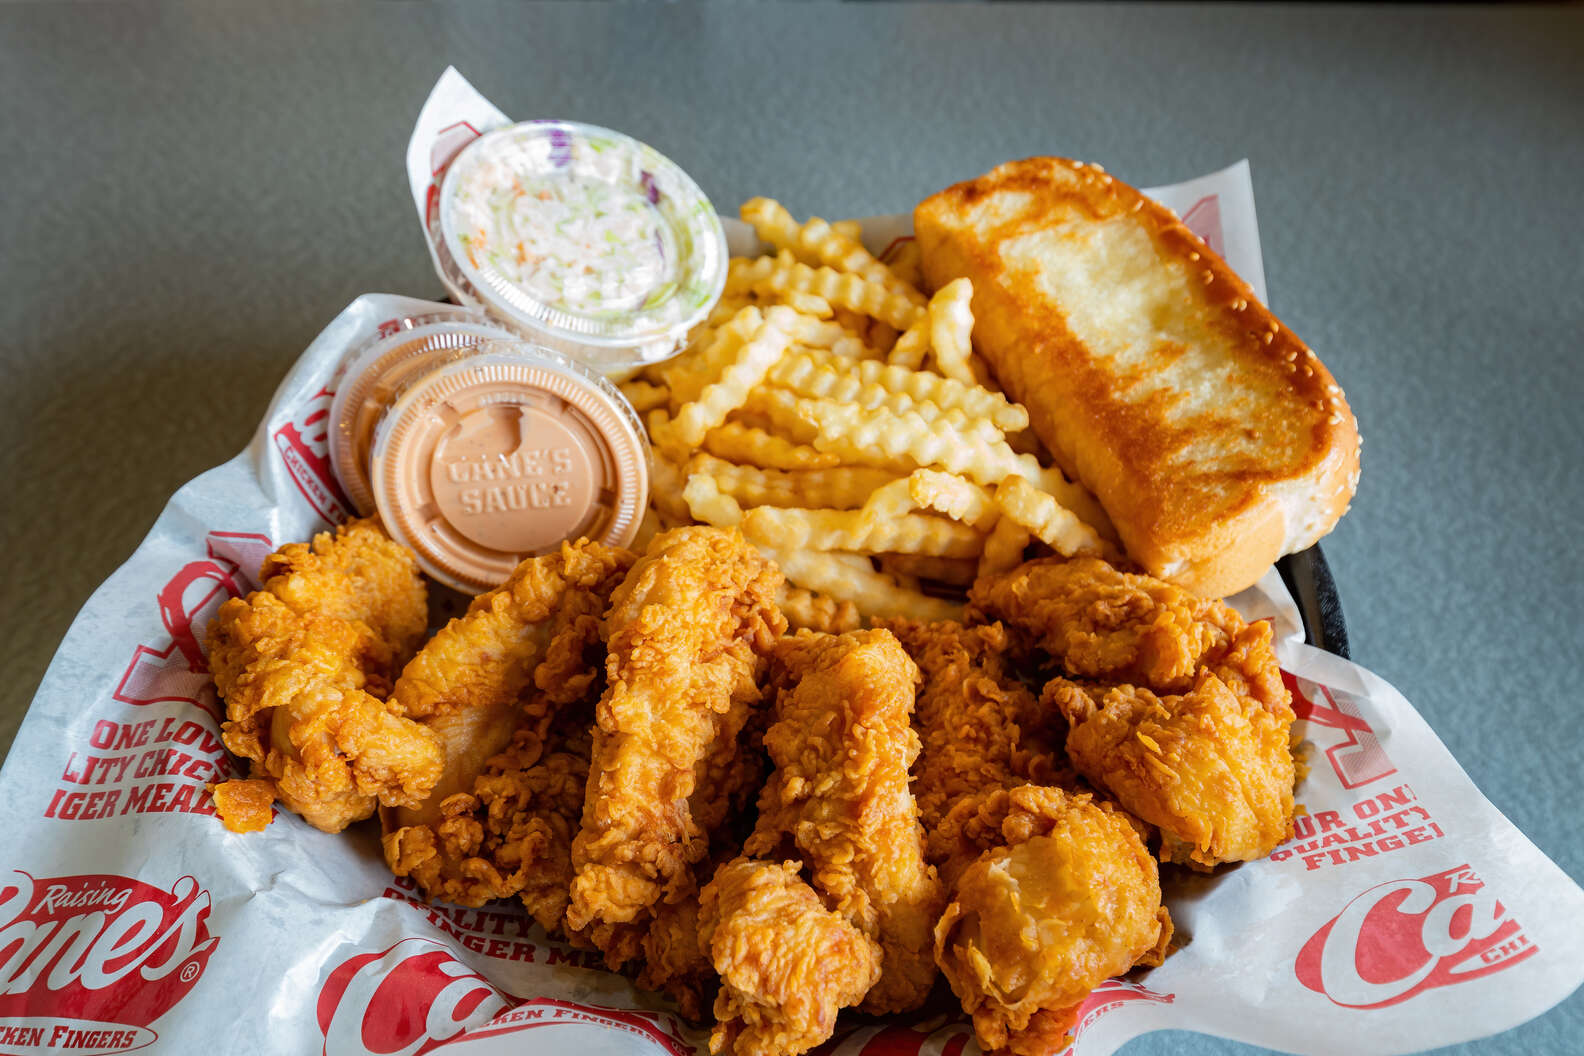 The Big Problem Some People Have With Raising Cane's